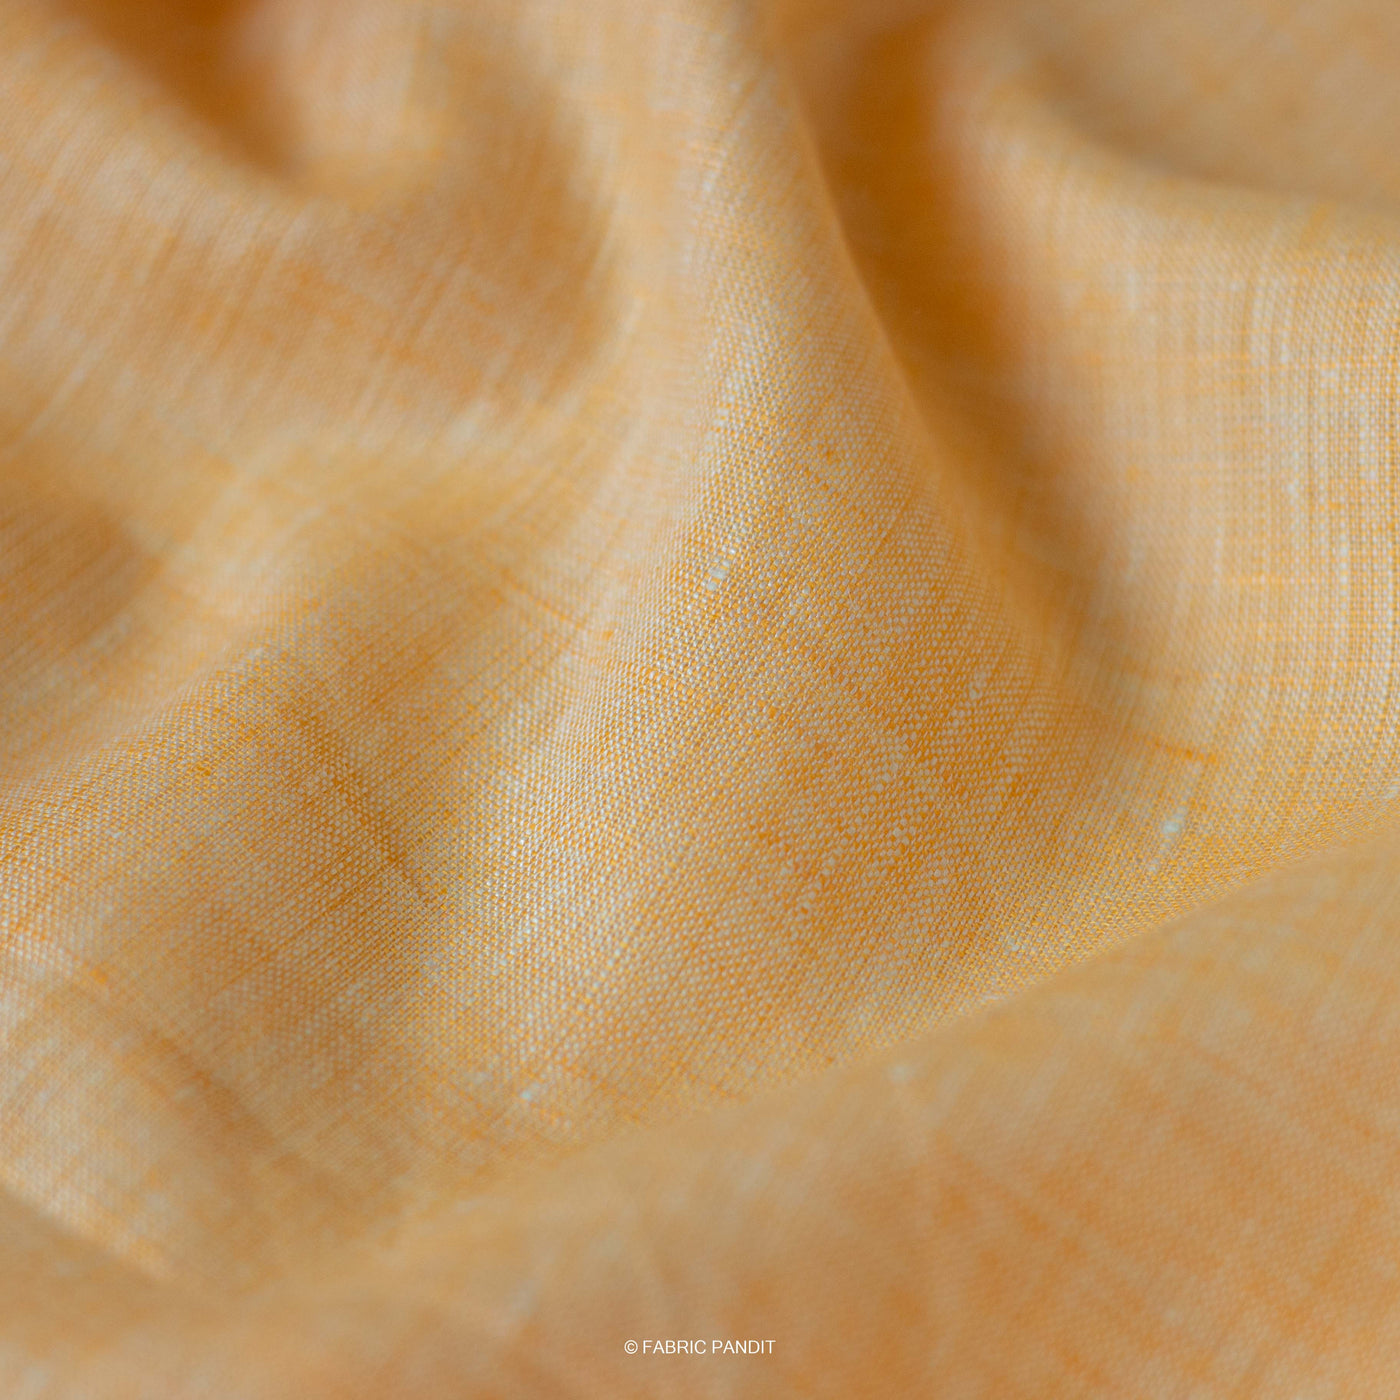 Fabric Pandit Cut Piece 0.25M (CUT PIECE) Amber Yellow Color Plain Yarn Dyed 60 Lea Pure Linen Fabric (58 Inches)